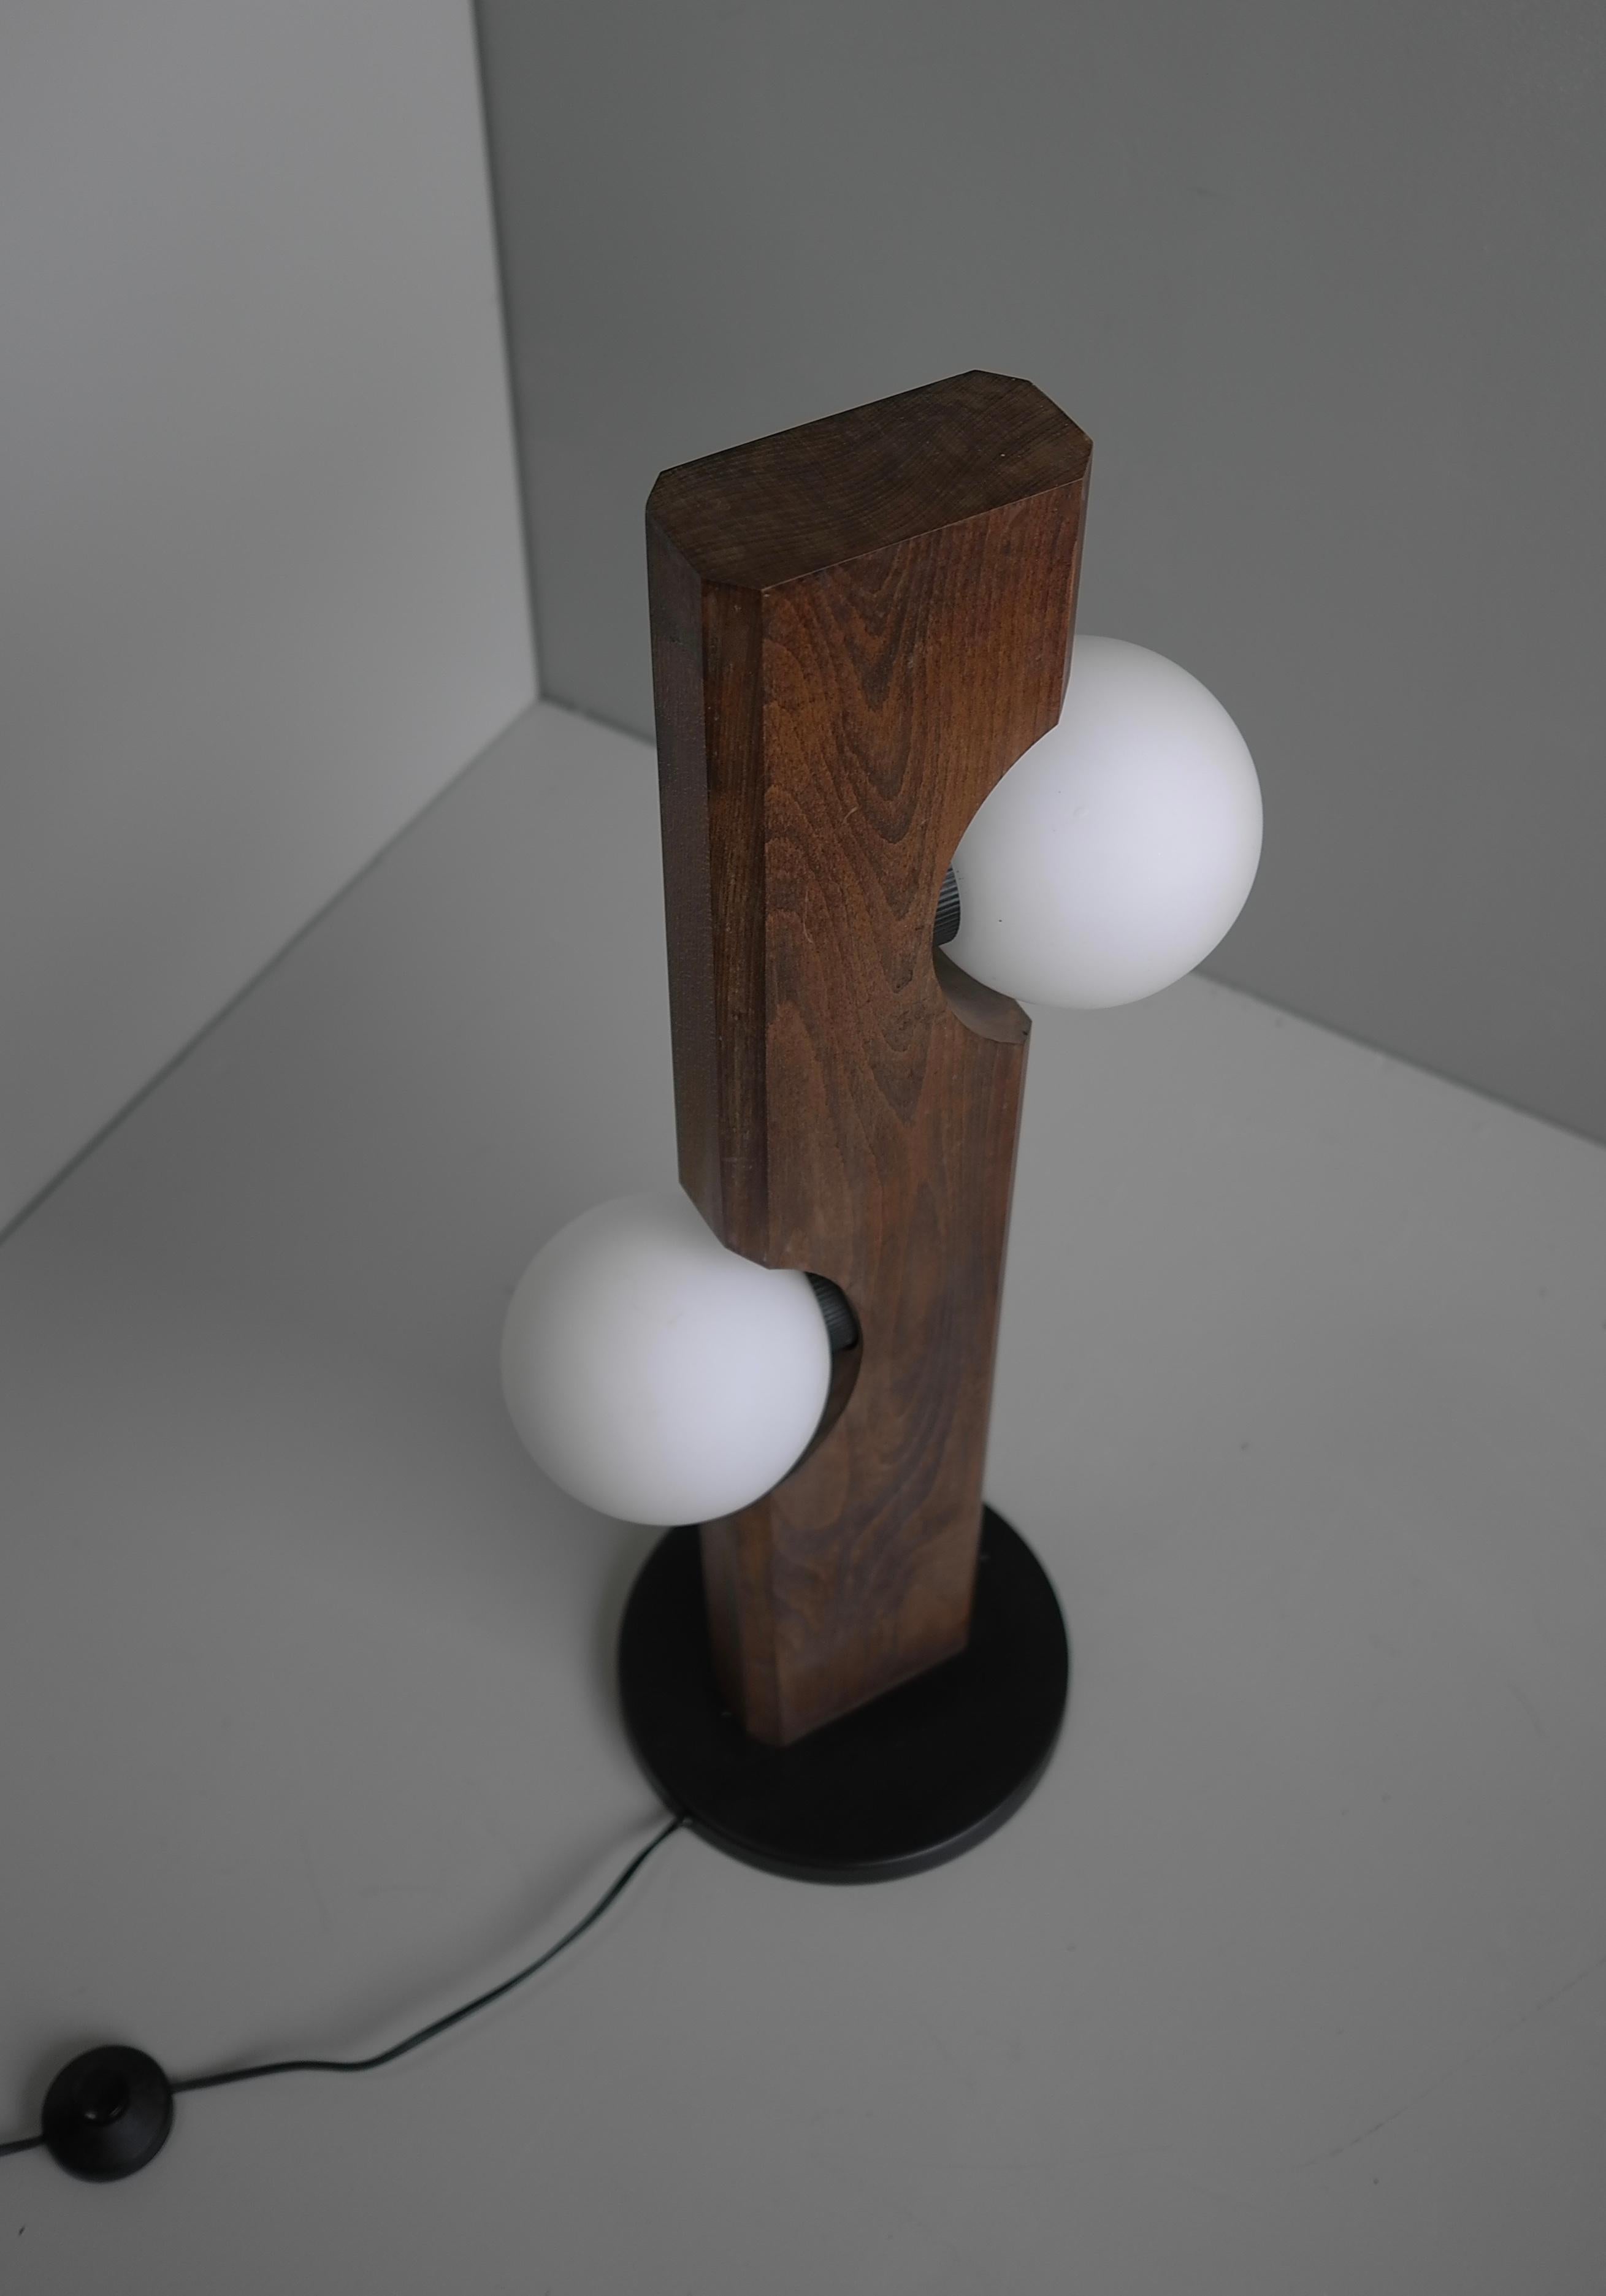 Mid-20th Century Temde Leuchten Floor or Table Lamp in Wood with White Glass Balls, Germany 1969 For Sale